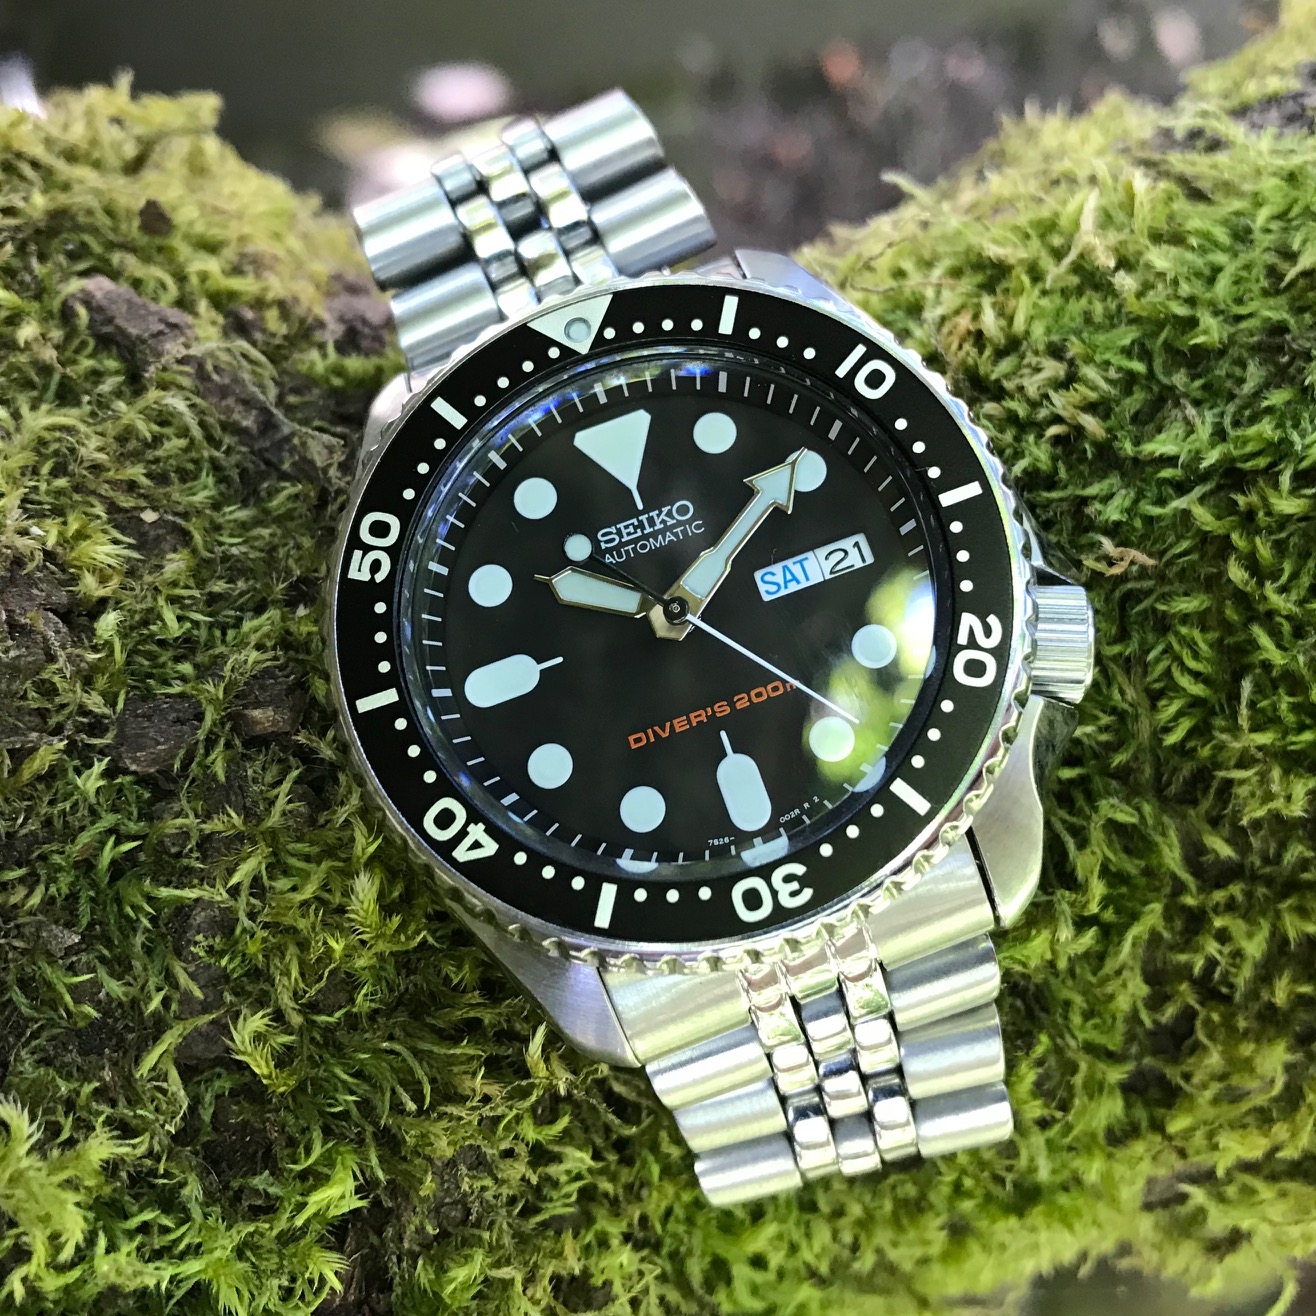 The Seiko SKX007: Why Buying Another One | Two Broke Watch Snobs